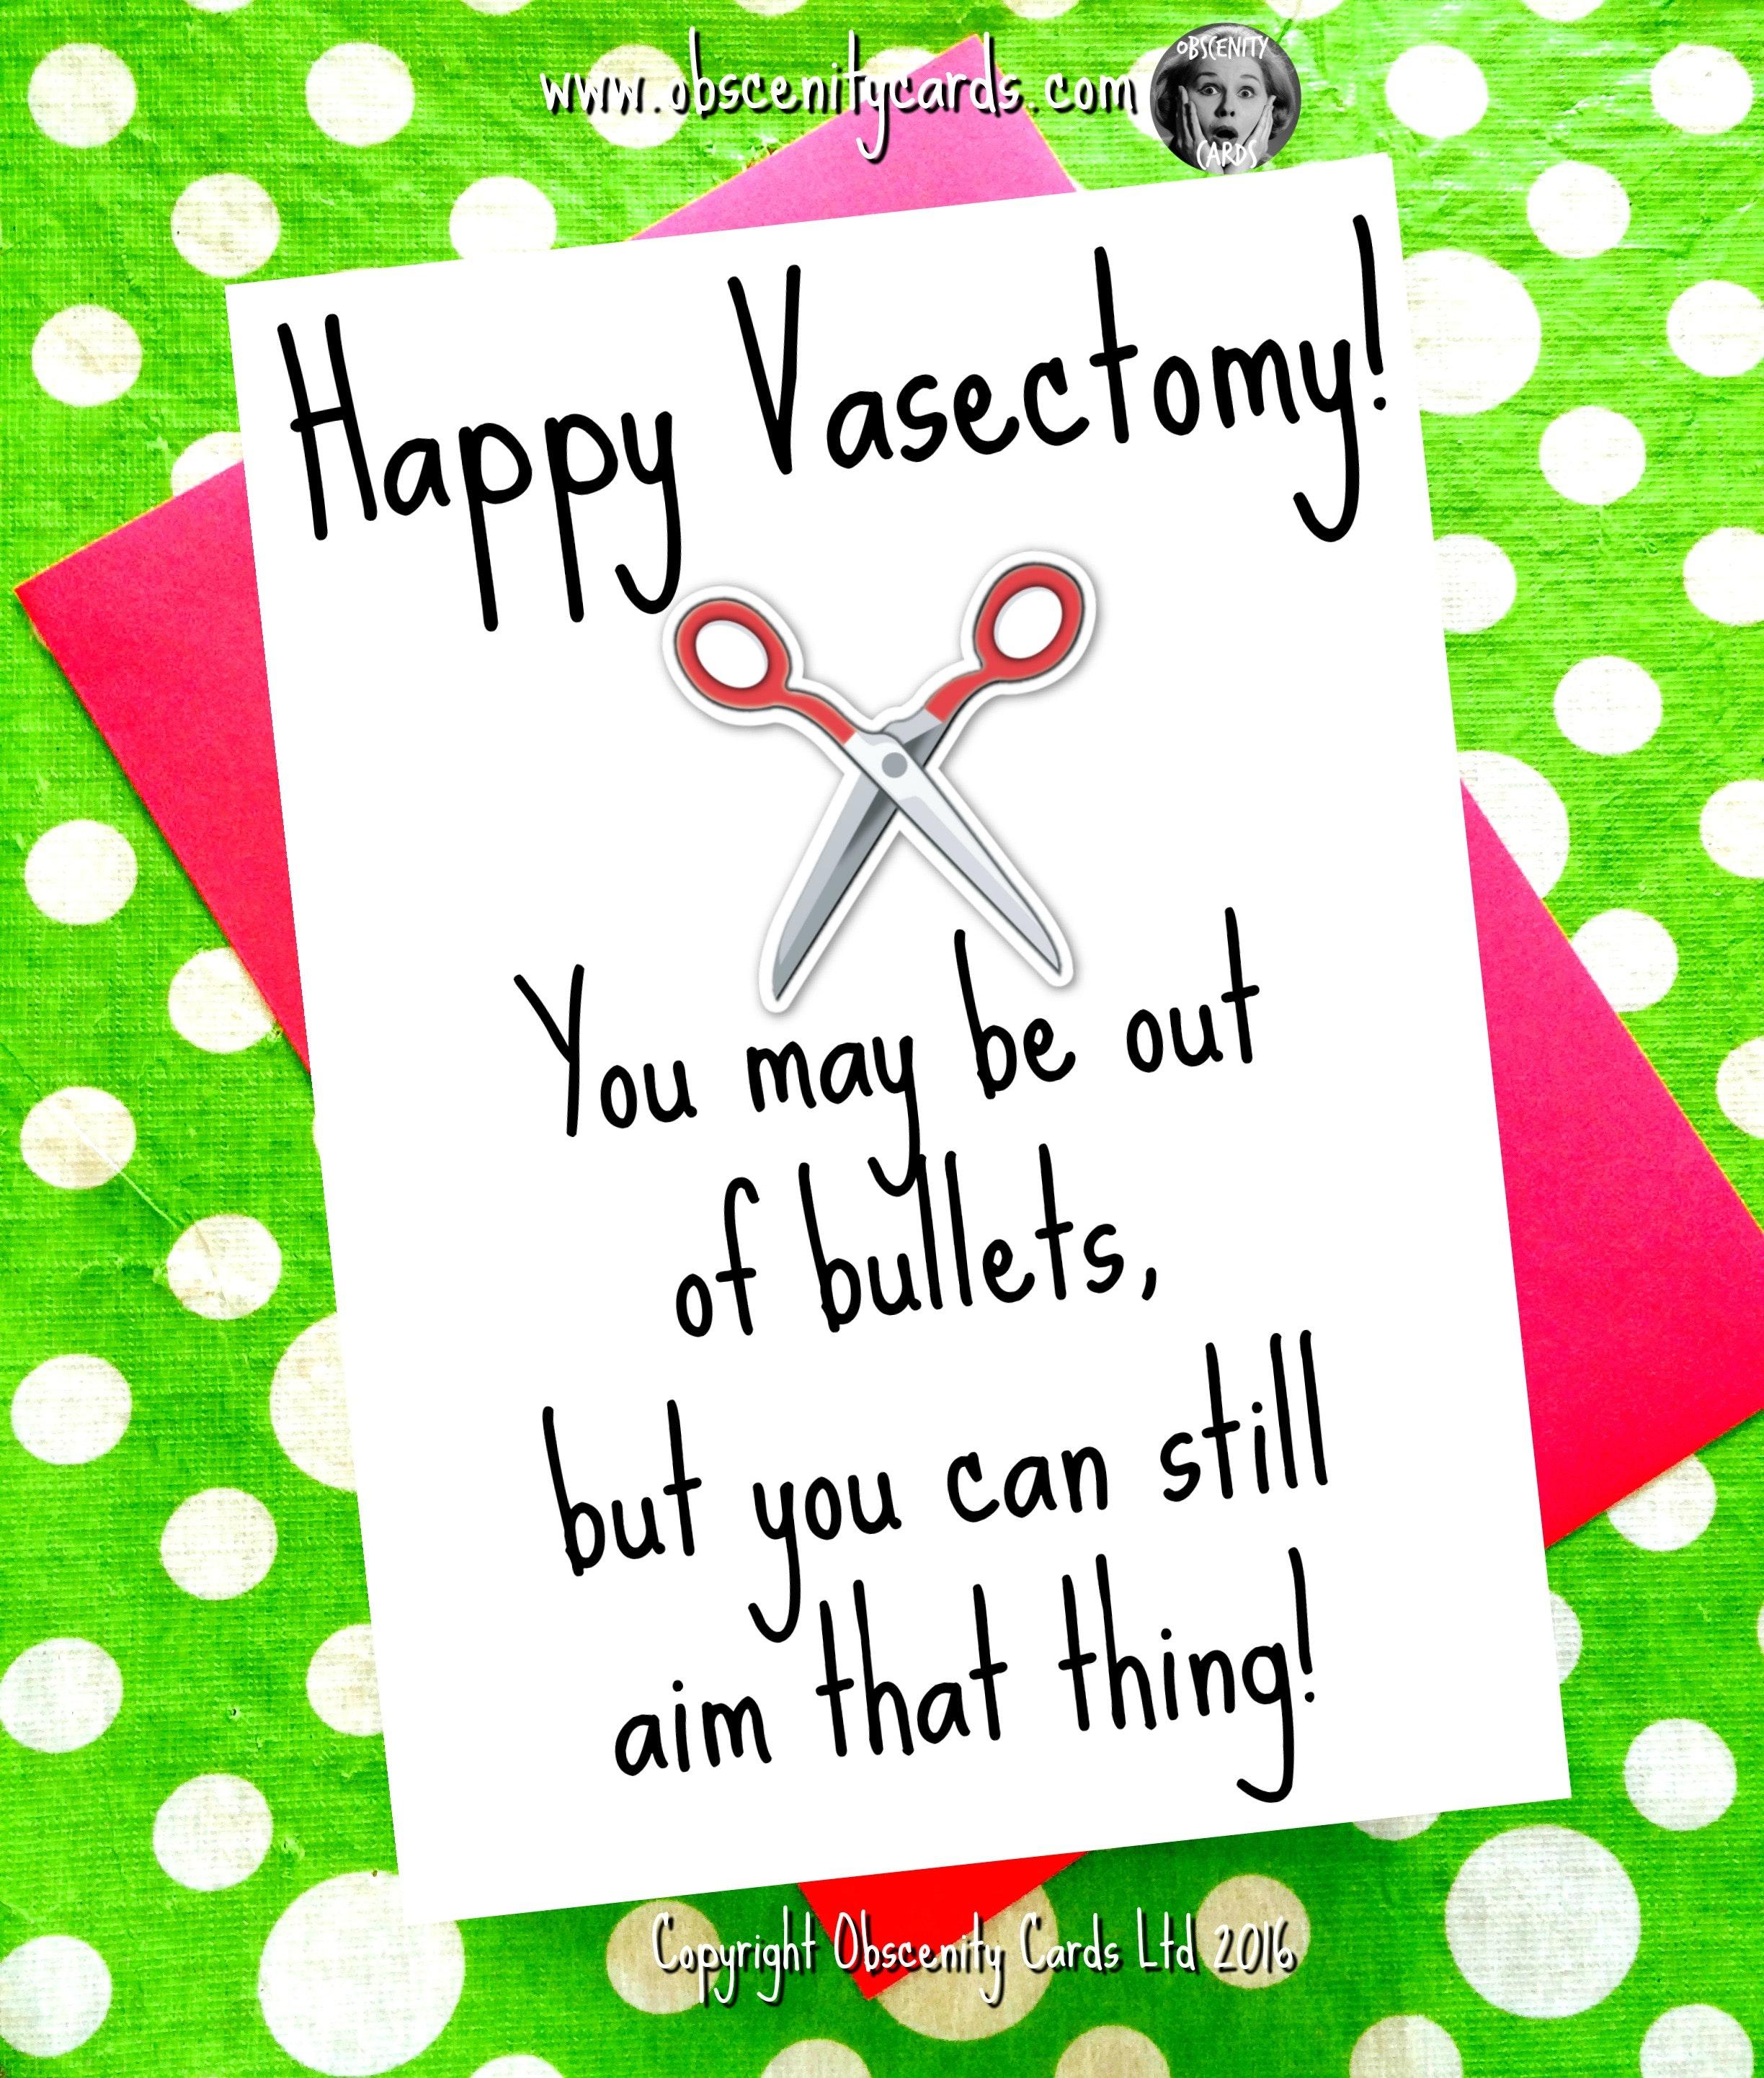 Funny Vasectomy Card You May Be Out Of Bullets But You Can Still Aim 